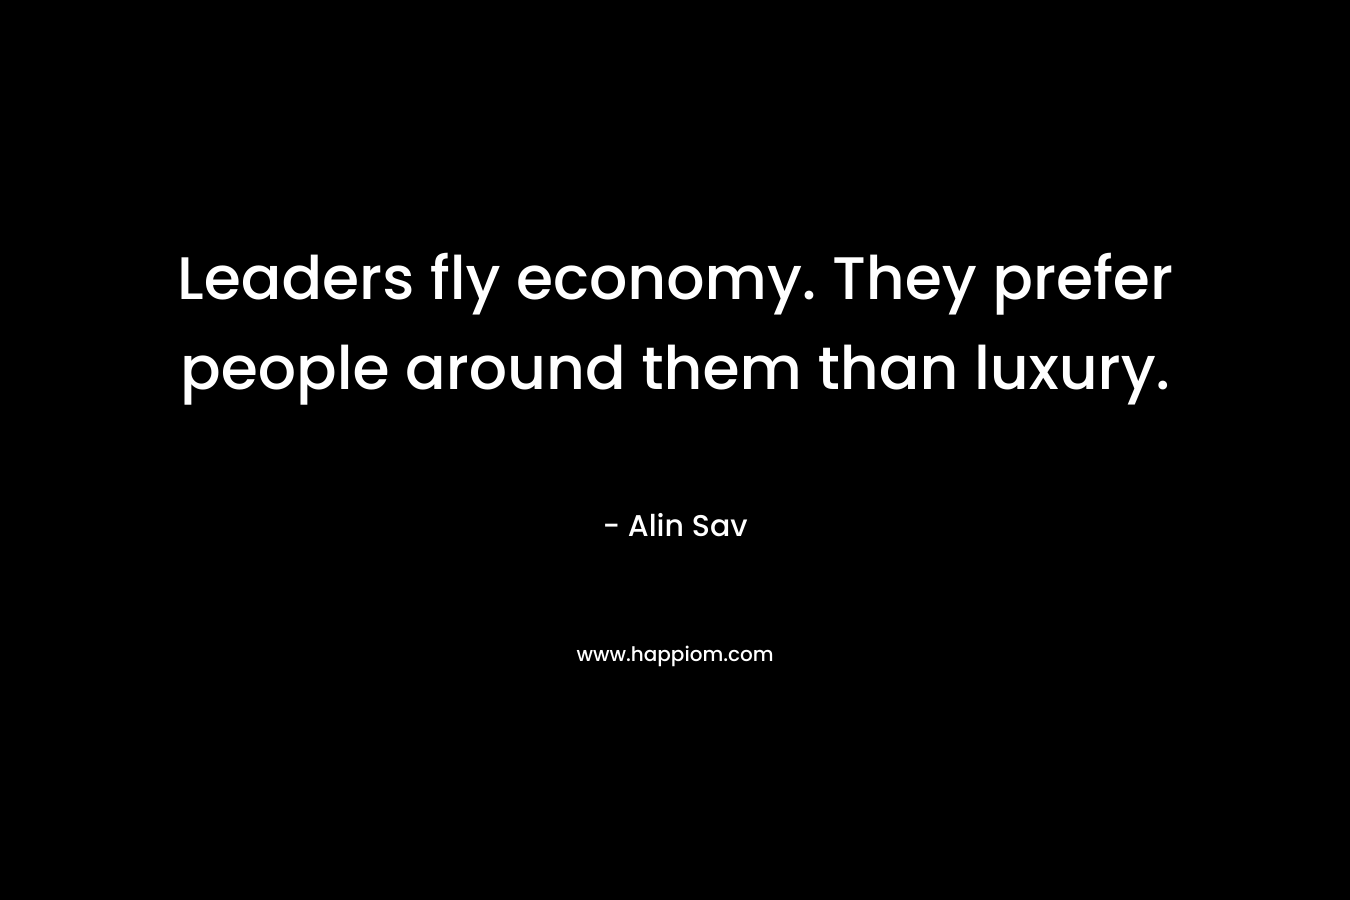 Leaders fly economy. They prefer people around them than luxury.